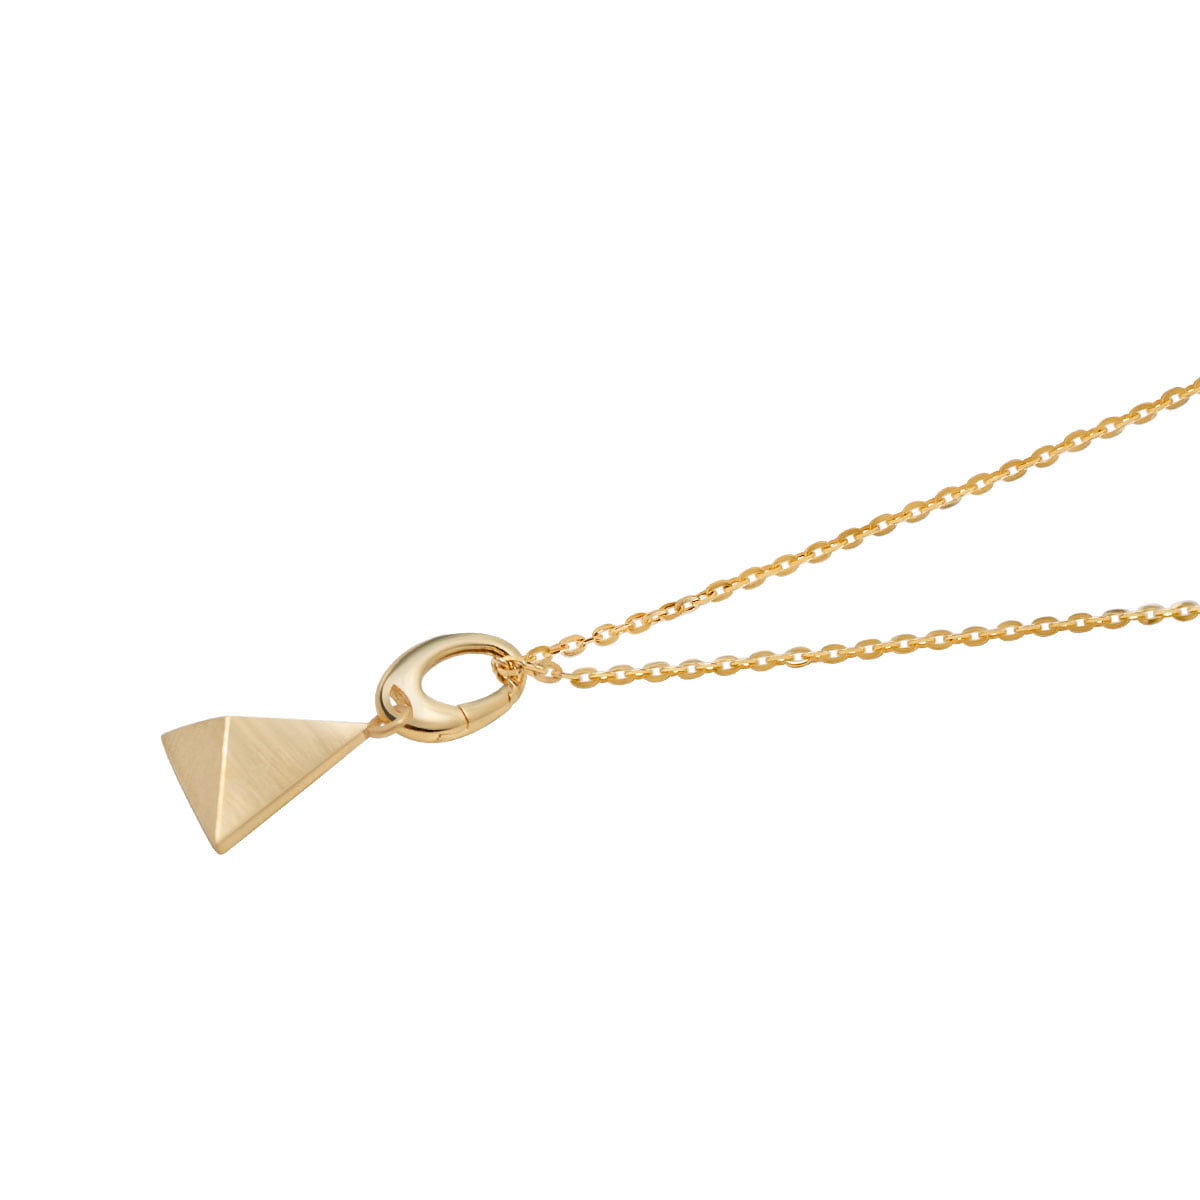 18ct Solid Gold Triangle Pendant Charm.